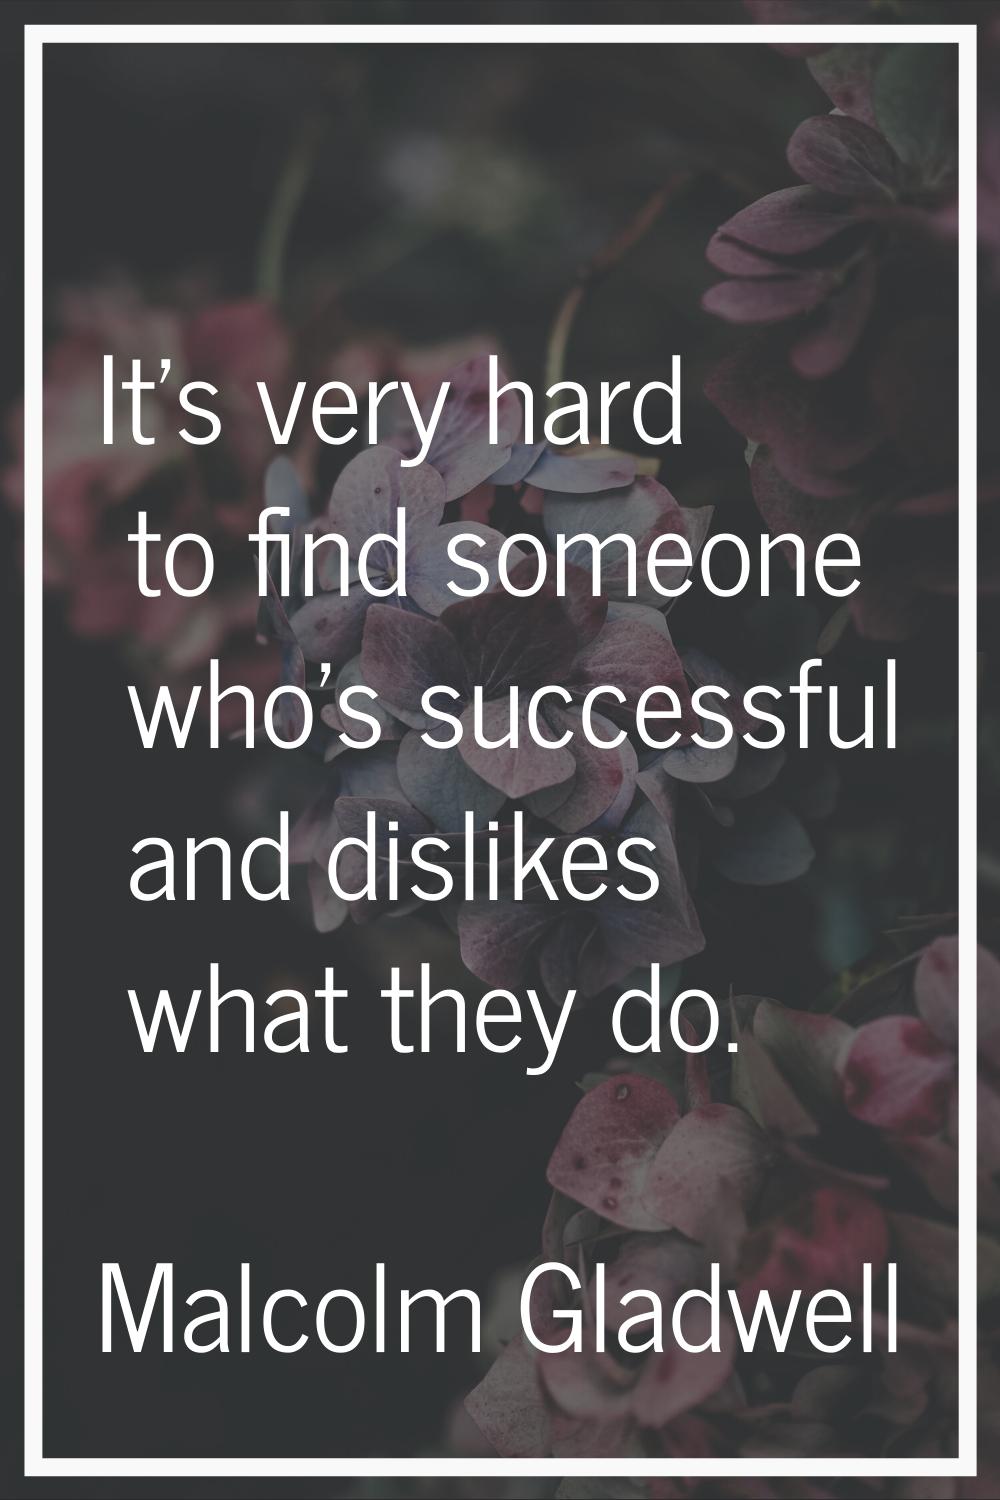 It's very hard to find someone who's successful and dislikes what they do.